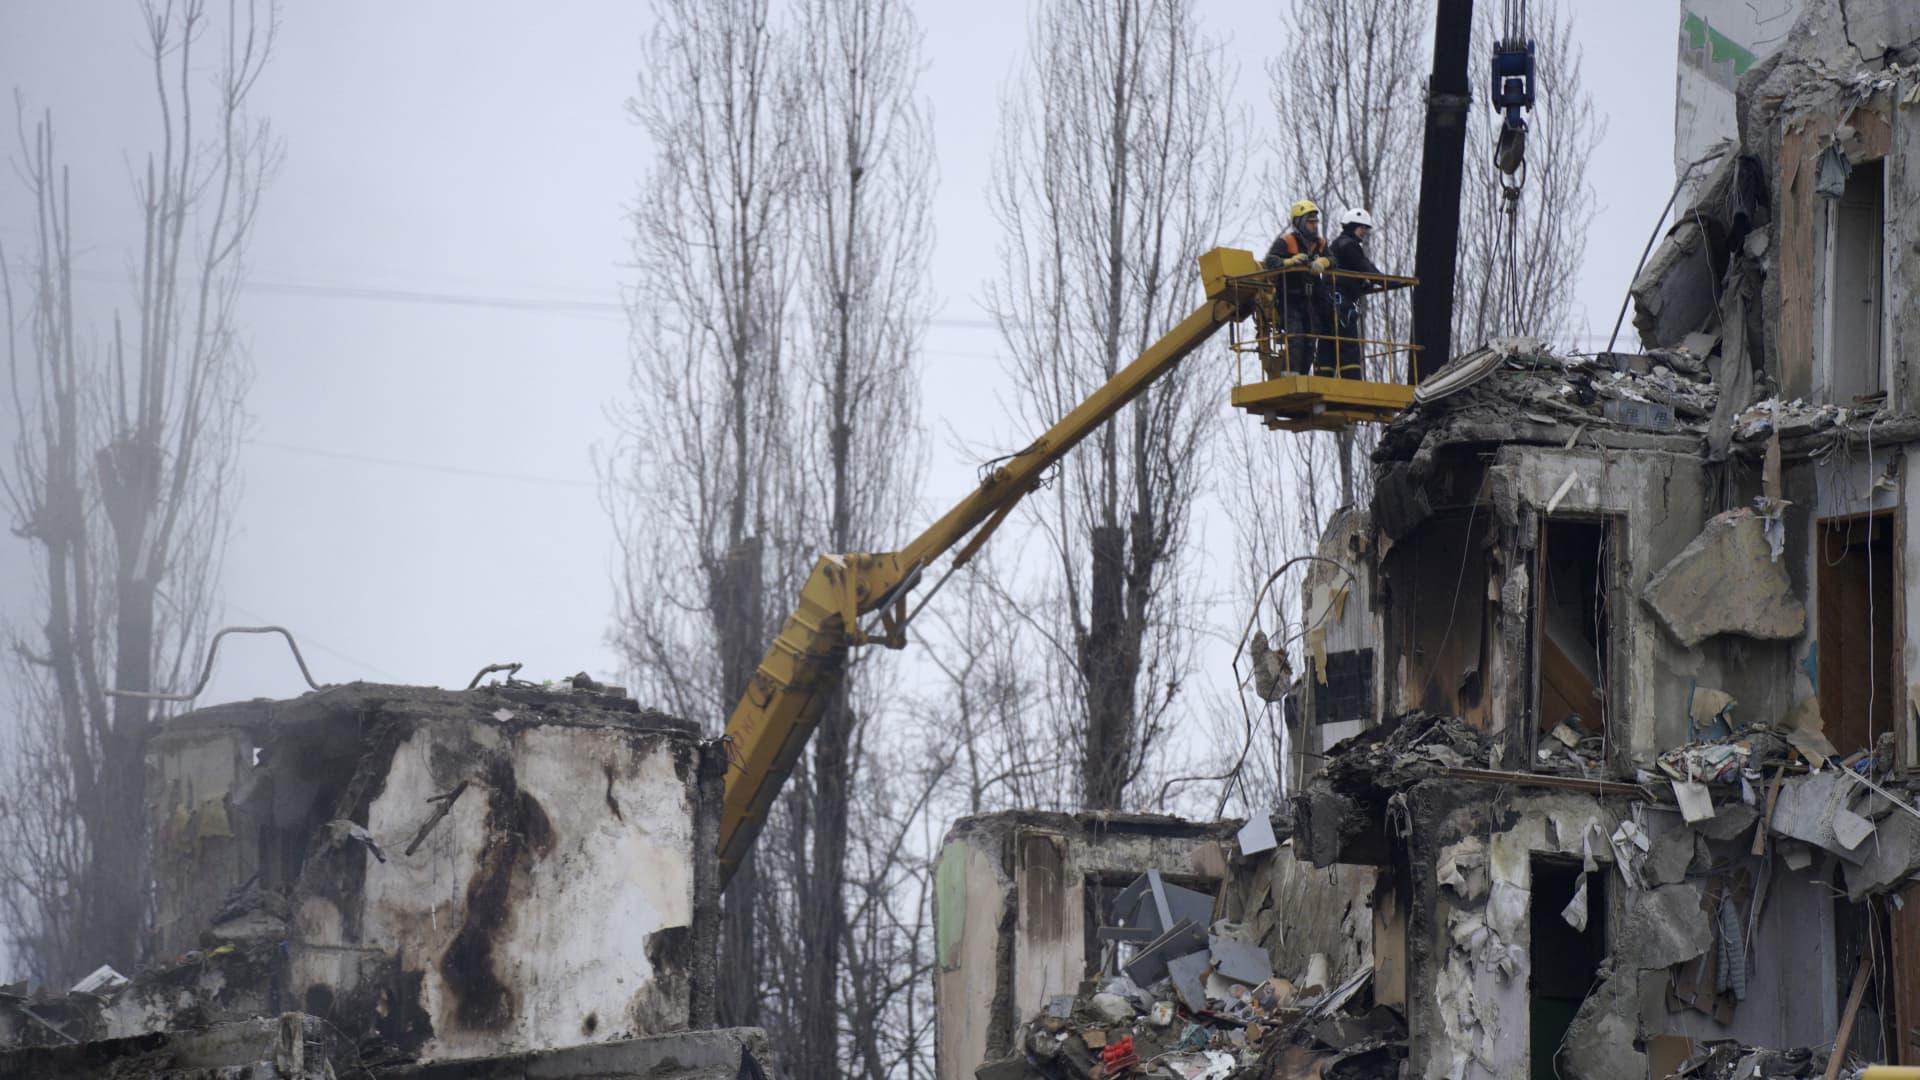 Rescuers work on a residential building destroyed after a missile strike, in Dnipro on January 16, 2023, amid the Russian invasion of Ukraine. - According to State Emergency Service report, as of 1:00 pm on December 16, 40 people died, including 6 children; 75 people got injured, including 14 children; 39 people were rescued, including 6 children; the fate of 34 people is still unknown.